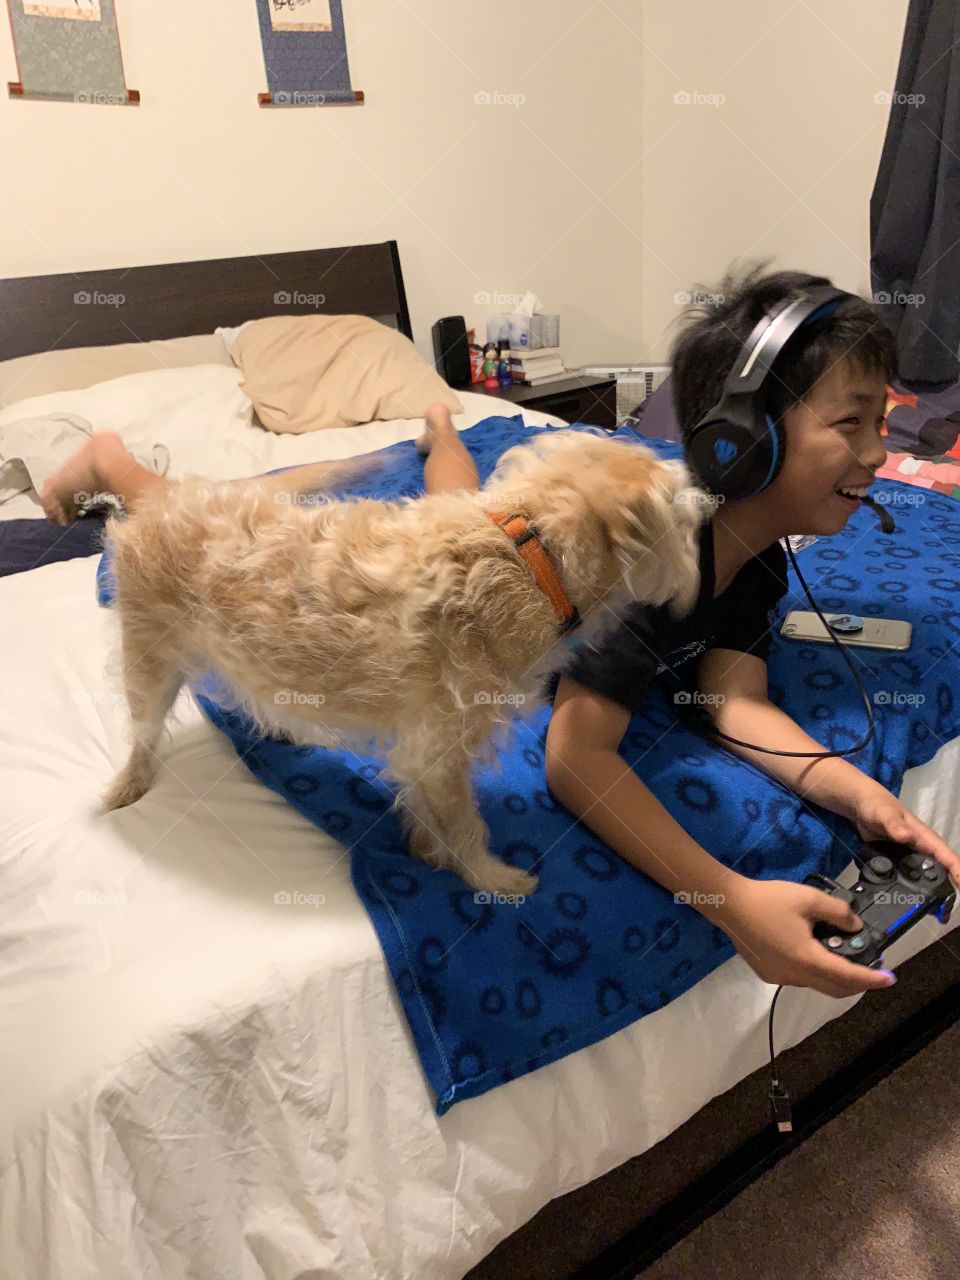 Kids dogs and video games